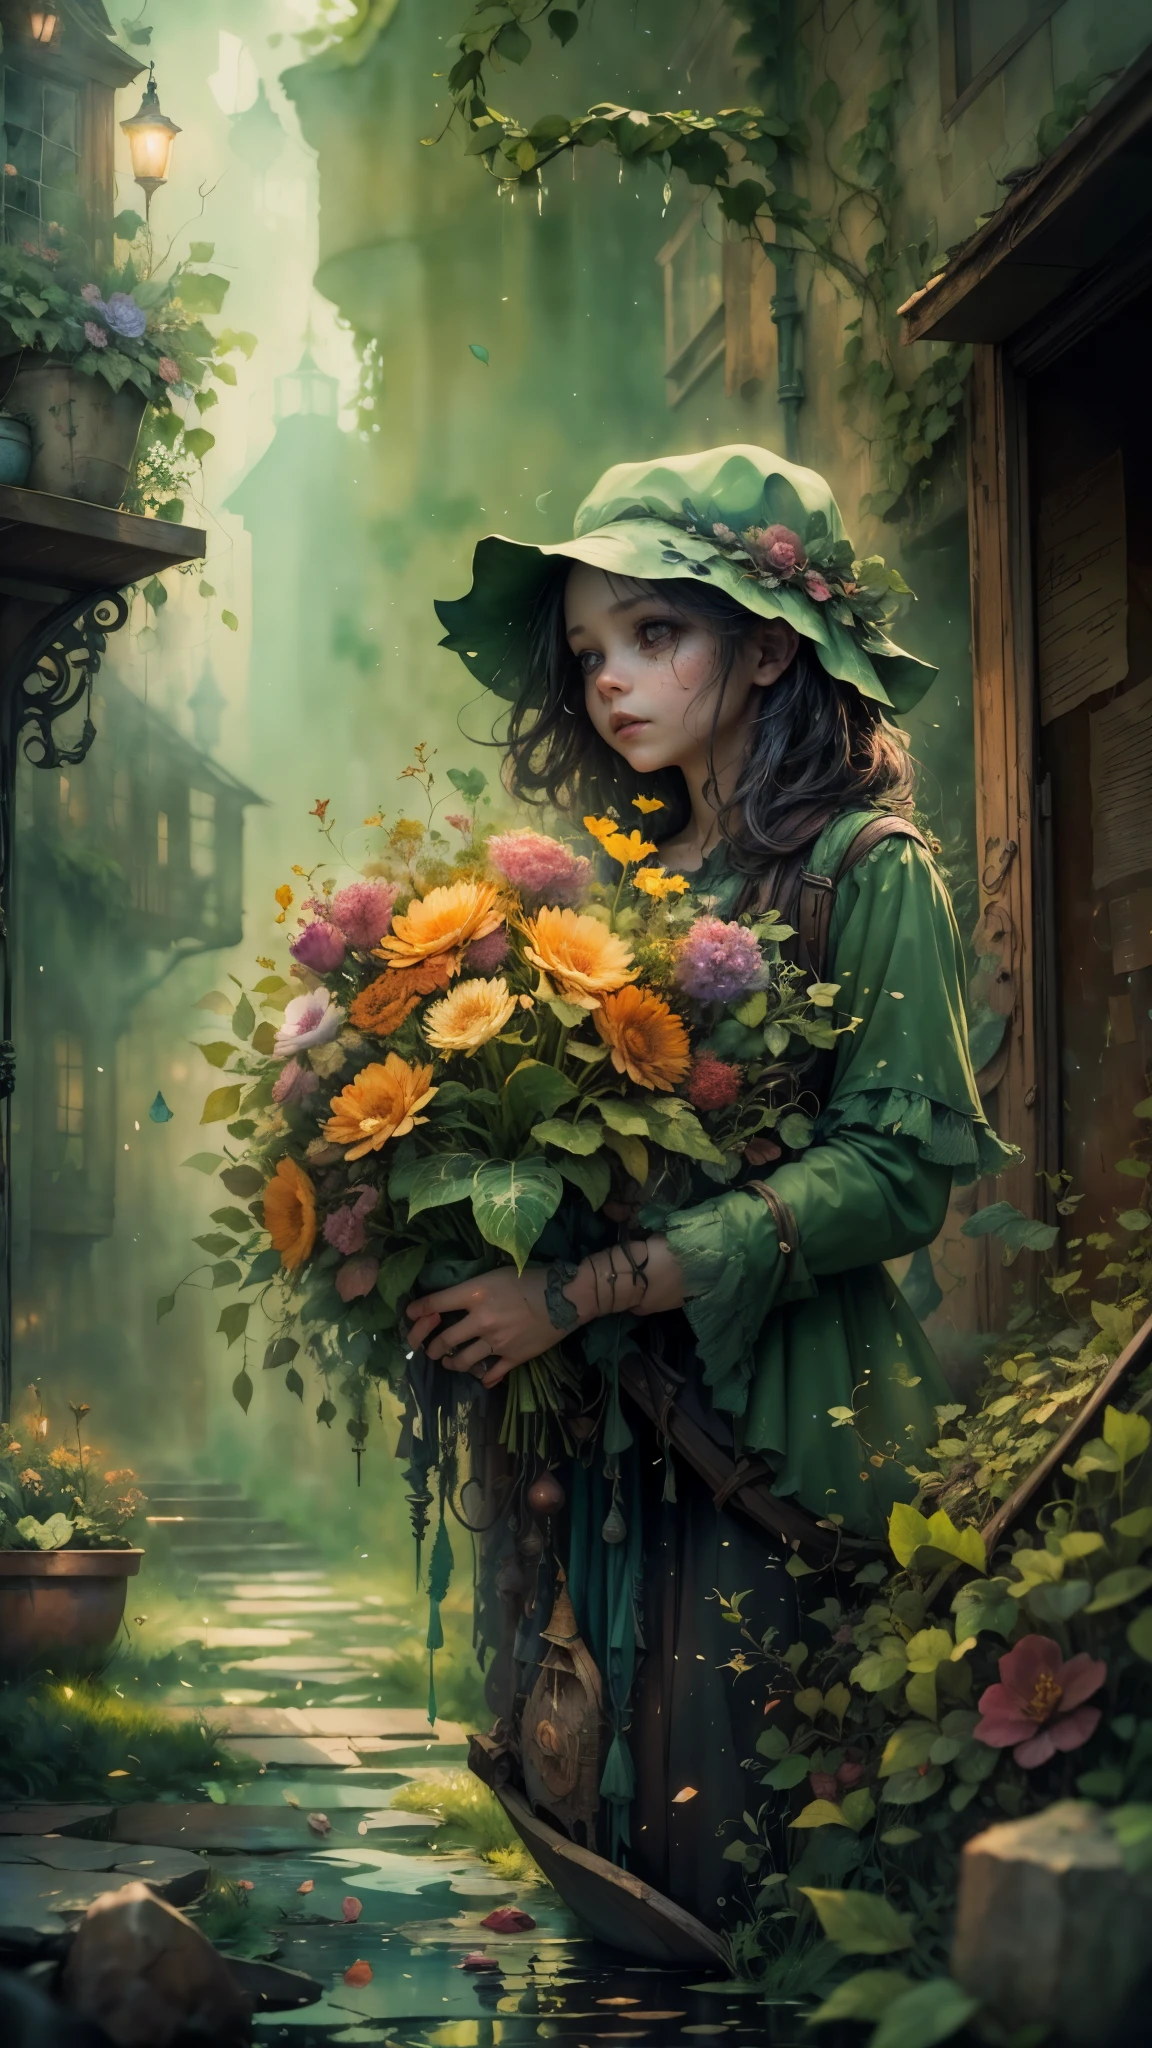 ((watercolor art)),(a tiny) humanoid creature, (holding firmly) a bunch of flowers, watercolor, dark gritty, street, fantasy, (best quality, 4k, highres, masterpiece:1.2), ultra-detailed, (realistic:1.37), vivid colors, (moody lighting), (magical atmosphere), (cobblestone road), (mysterious shadows), (fantastical architecture), (enchanted surroundings), (whimsical elements), (misty aura), (intricate details), (emotionally expressive face), (unique character design), (lush foliage), (overgrown vines), (ethereal glow), (fallen petals), (contrast between light and dark), (captivating atmosphere), (heartwarming scene), (playful energy), (curiosity and wonder), (texture of the flowers), (impressionistic brushstrokes), (dreamlike charm), (sense of mystery), (gritty urban setting), (imaginative world), (dramatic composition), (expressive lines), (exquisite colors)